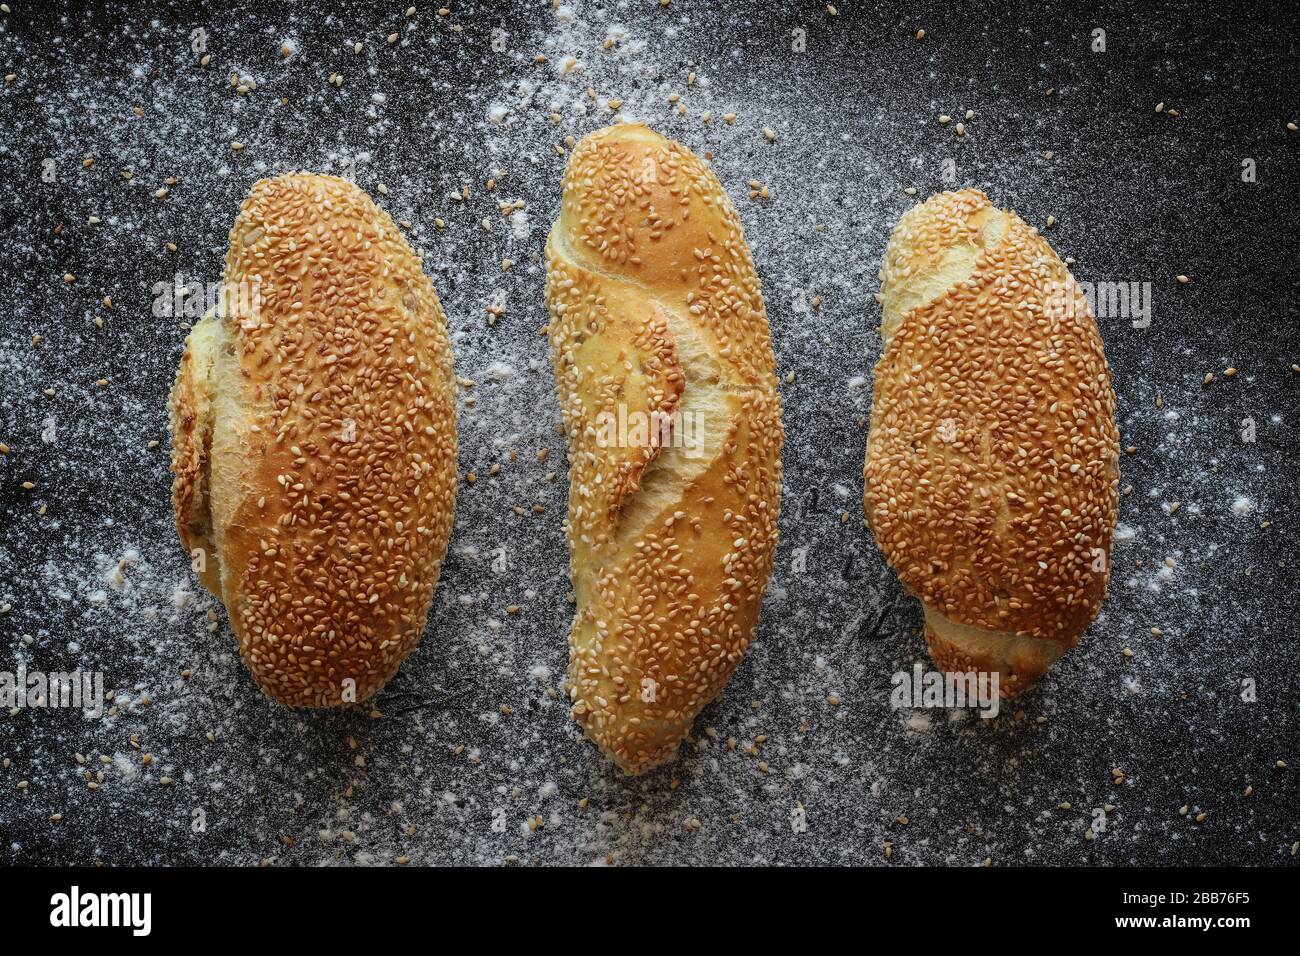 Flat lay shot of three fresh corn bread rolls with sesame seeds on black sprinkled with flour and sesame seeds backgroud Stock Photo